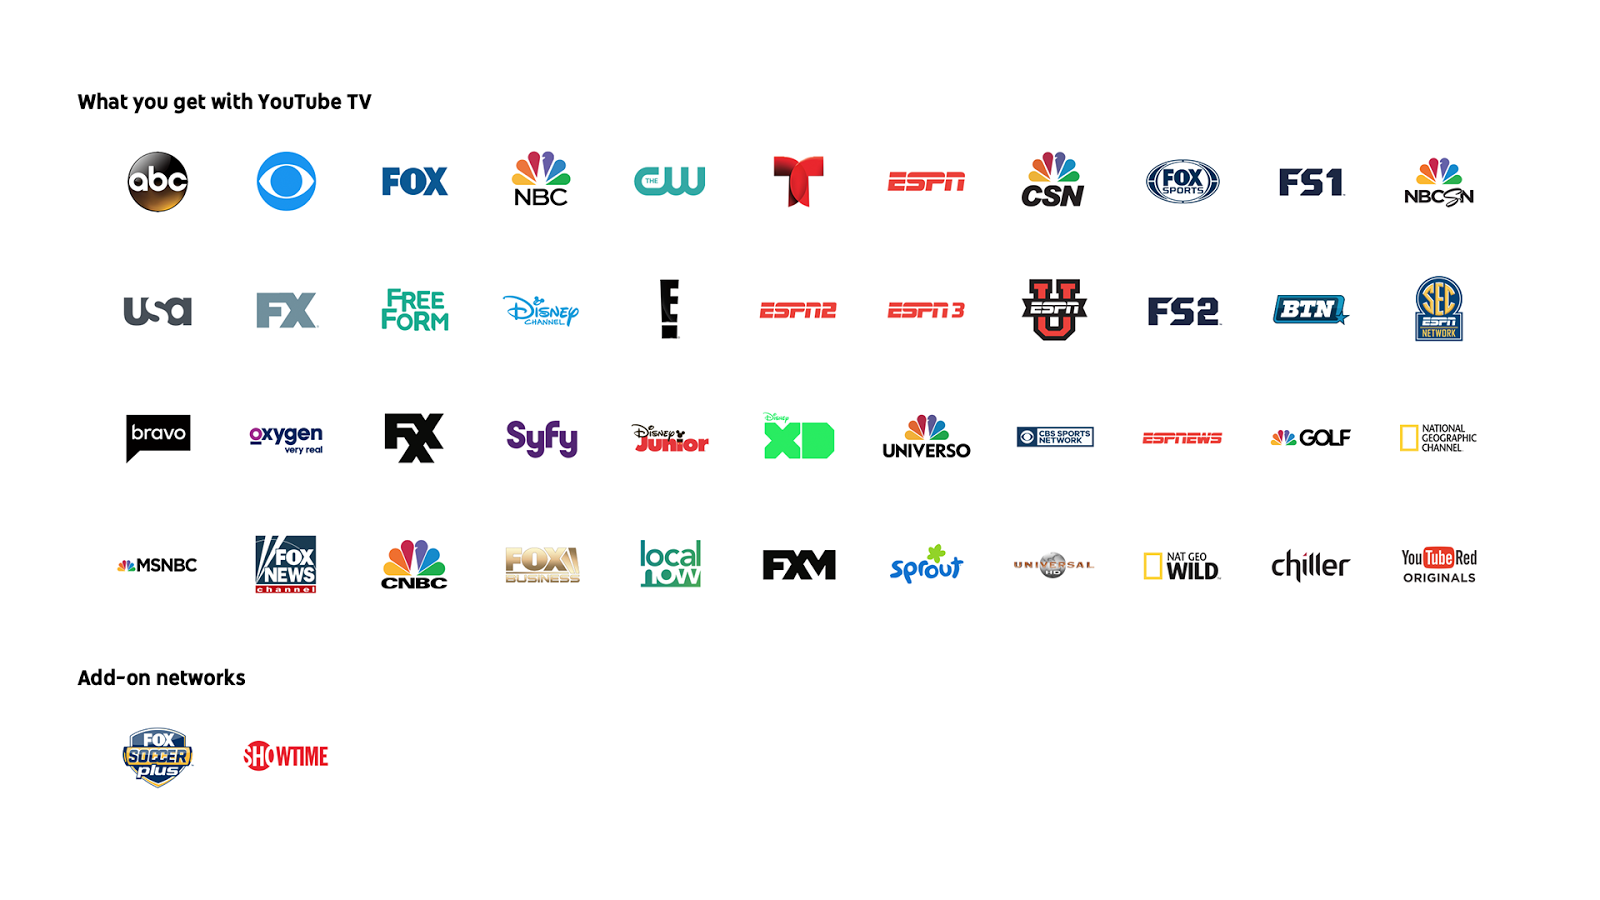 YouTube TV officially announced: 44 channels for $35 per month